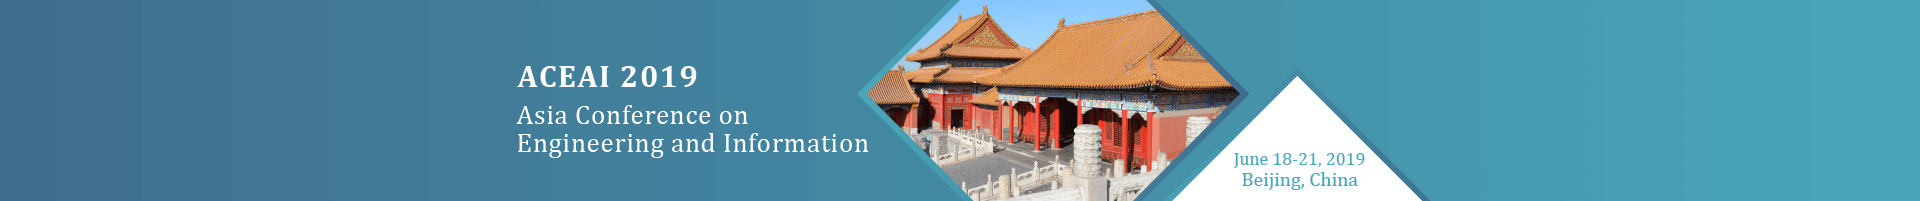 2019 ACEAI  Asia Conference on Engineering and Information, Beijing, China